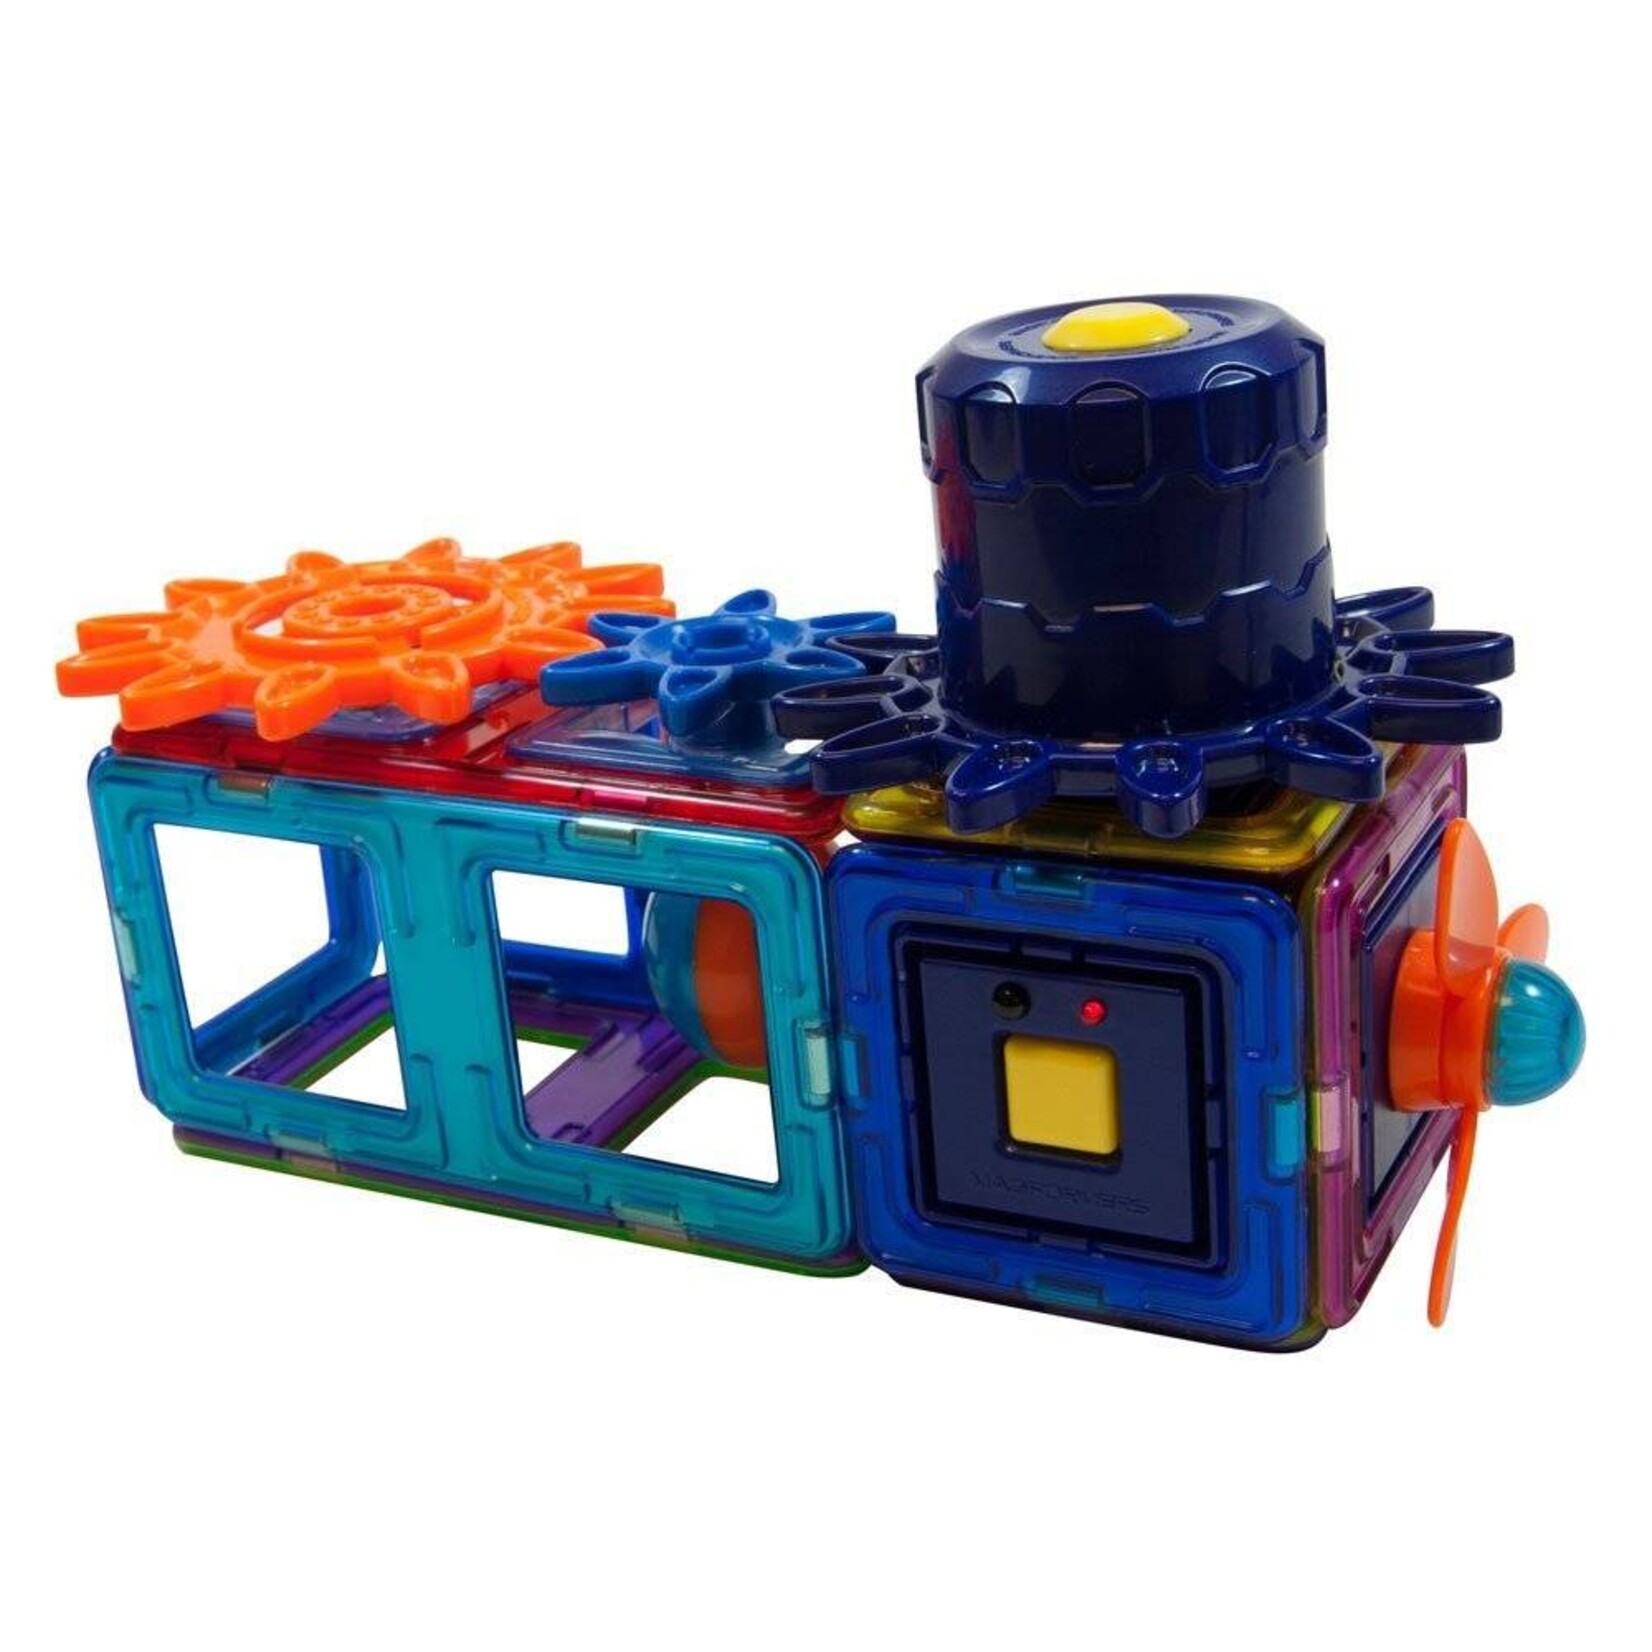 Magformers Small Power Set (22pc)